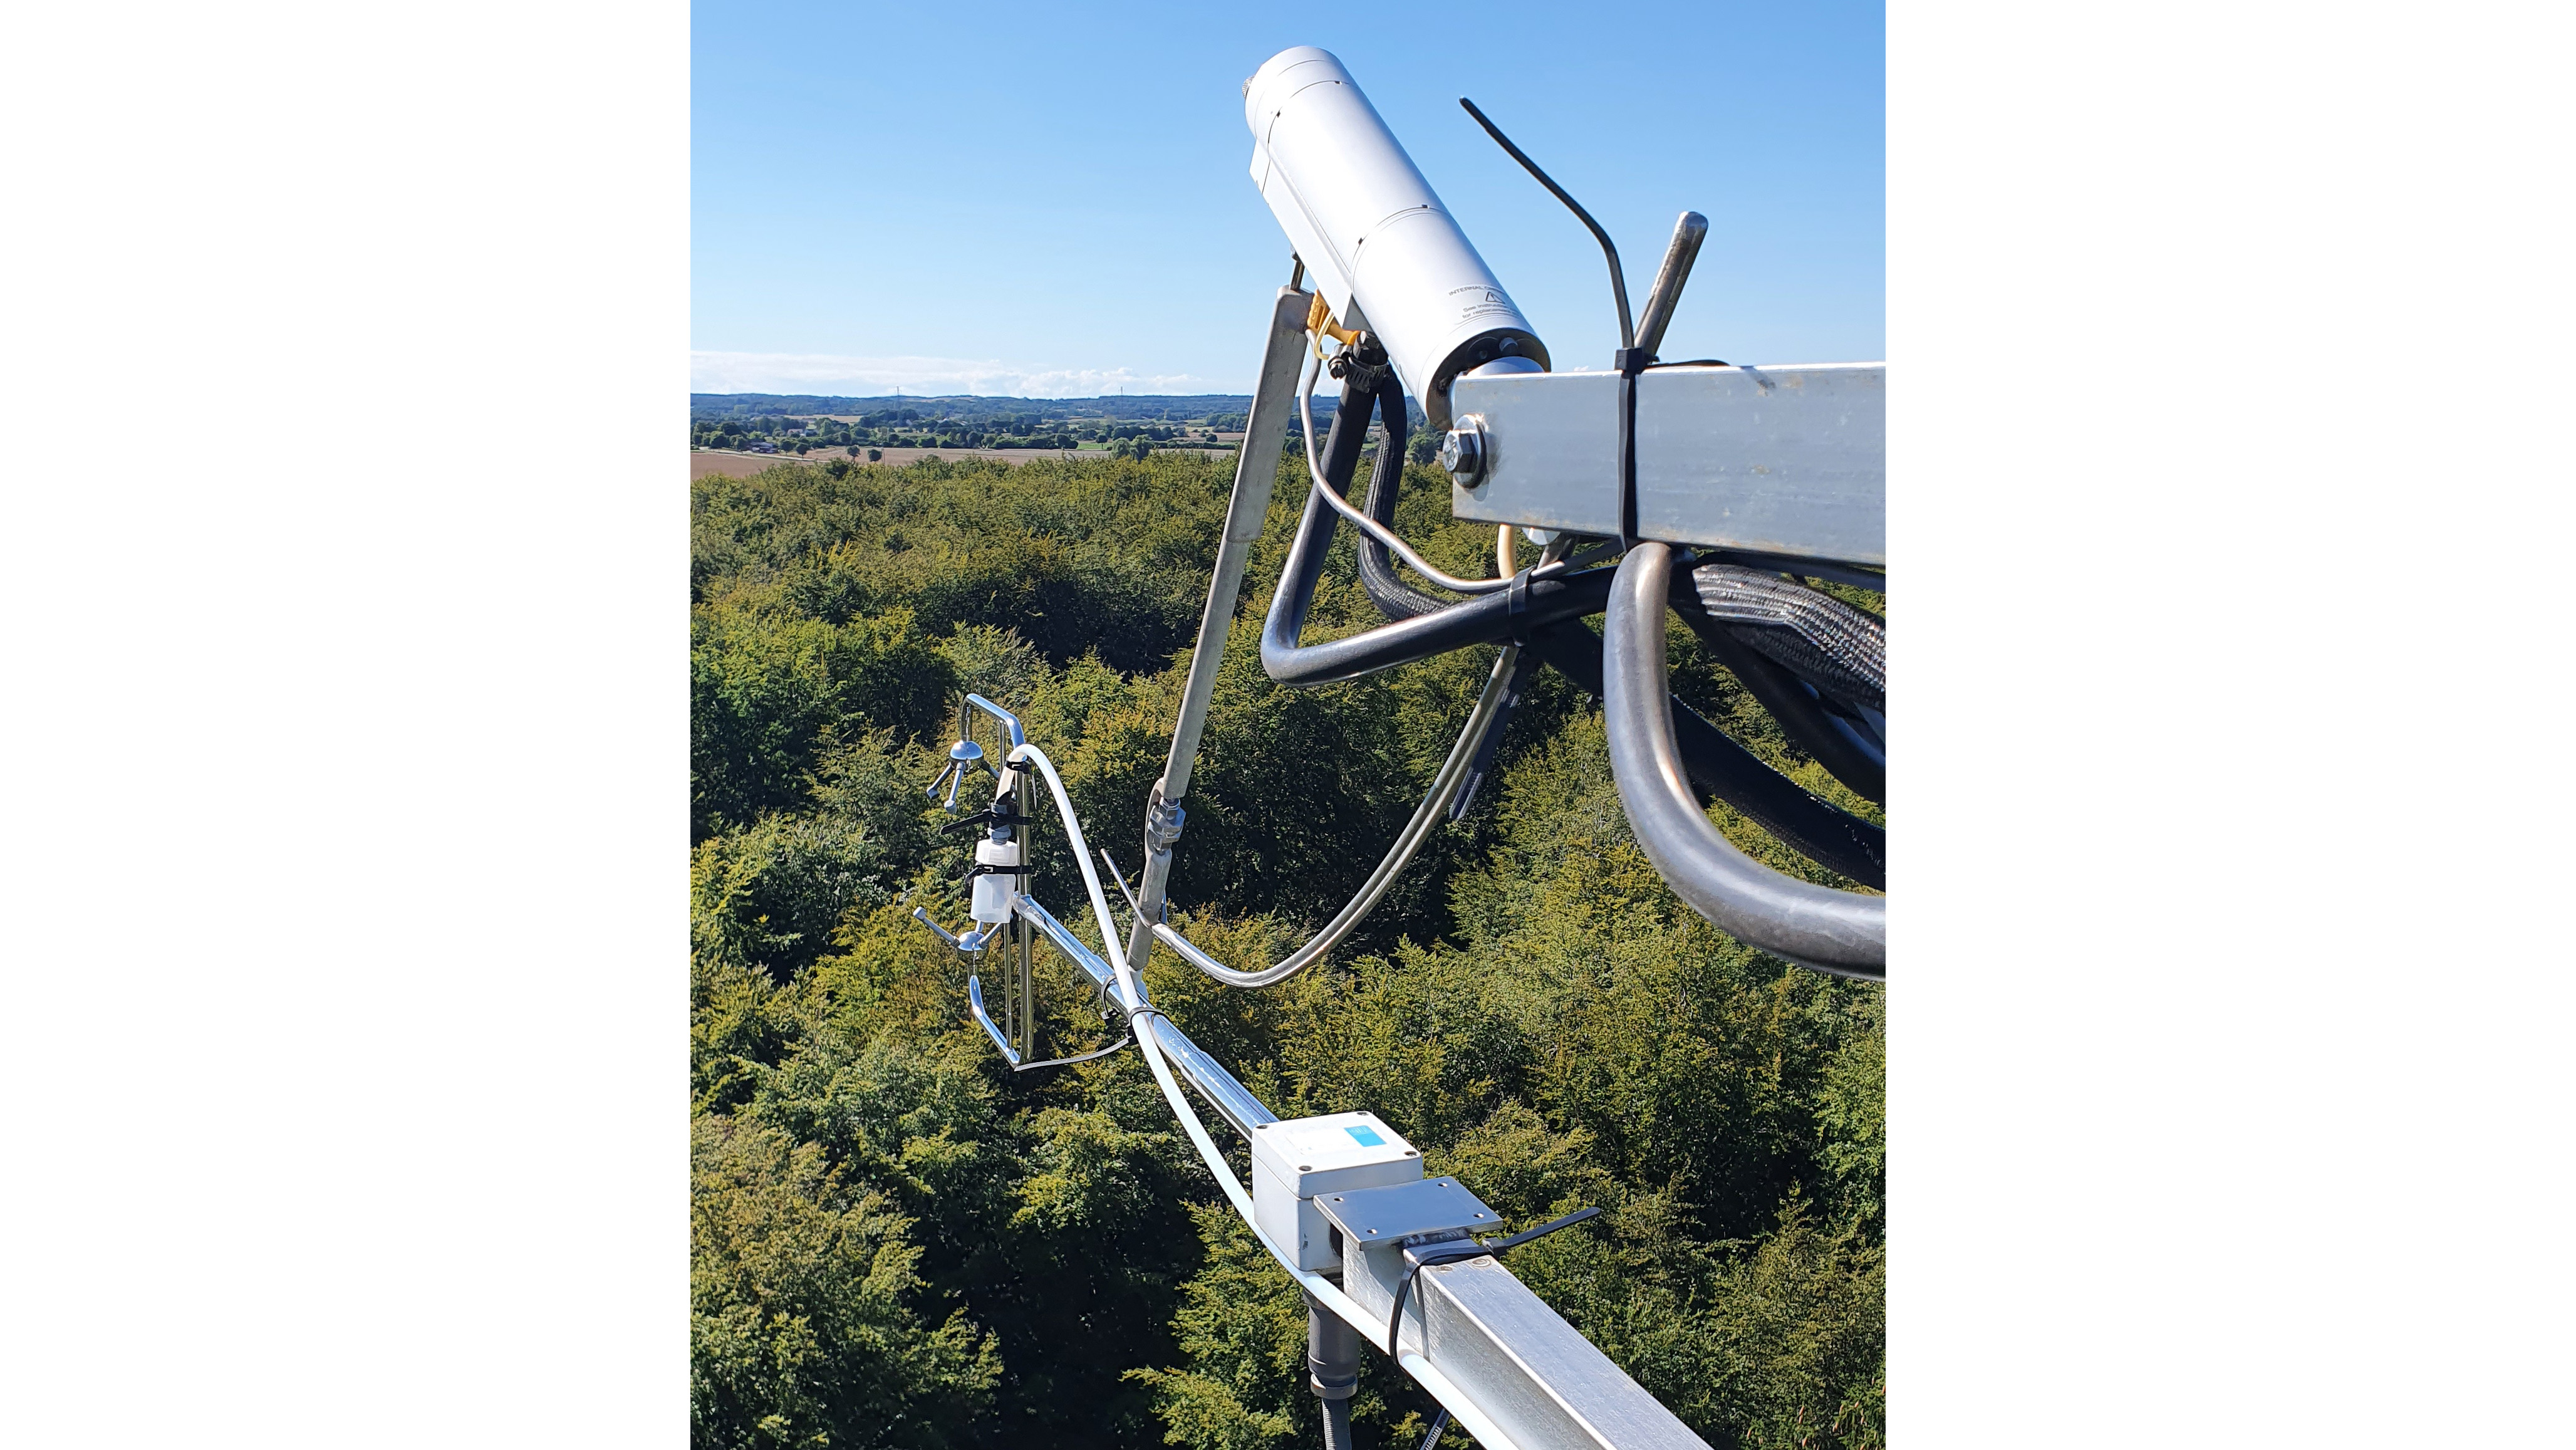 An element of the ICOS observation station with a blue sky and green leafed trees in the background